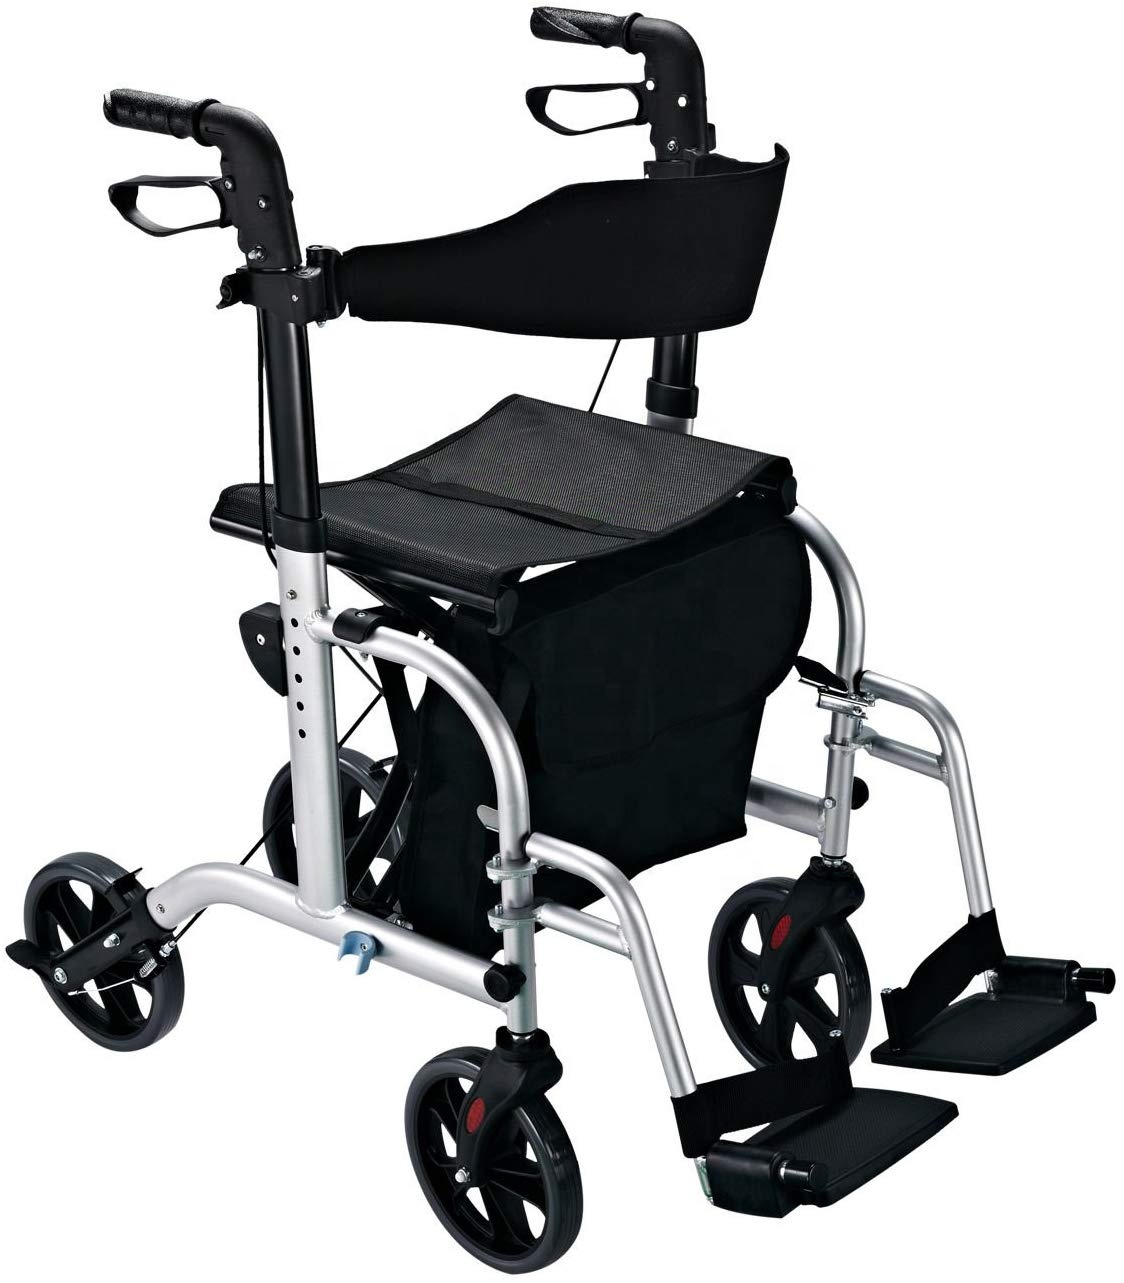 TONIA Medical with footrest function lightweight Wheel